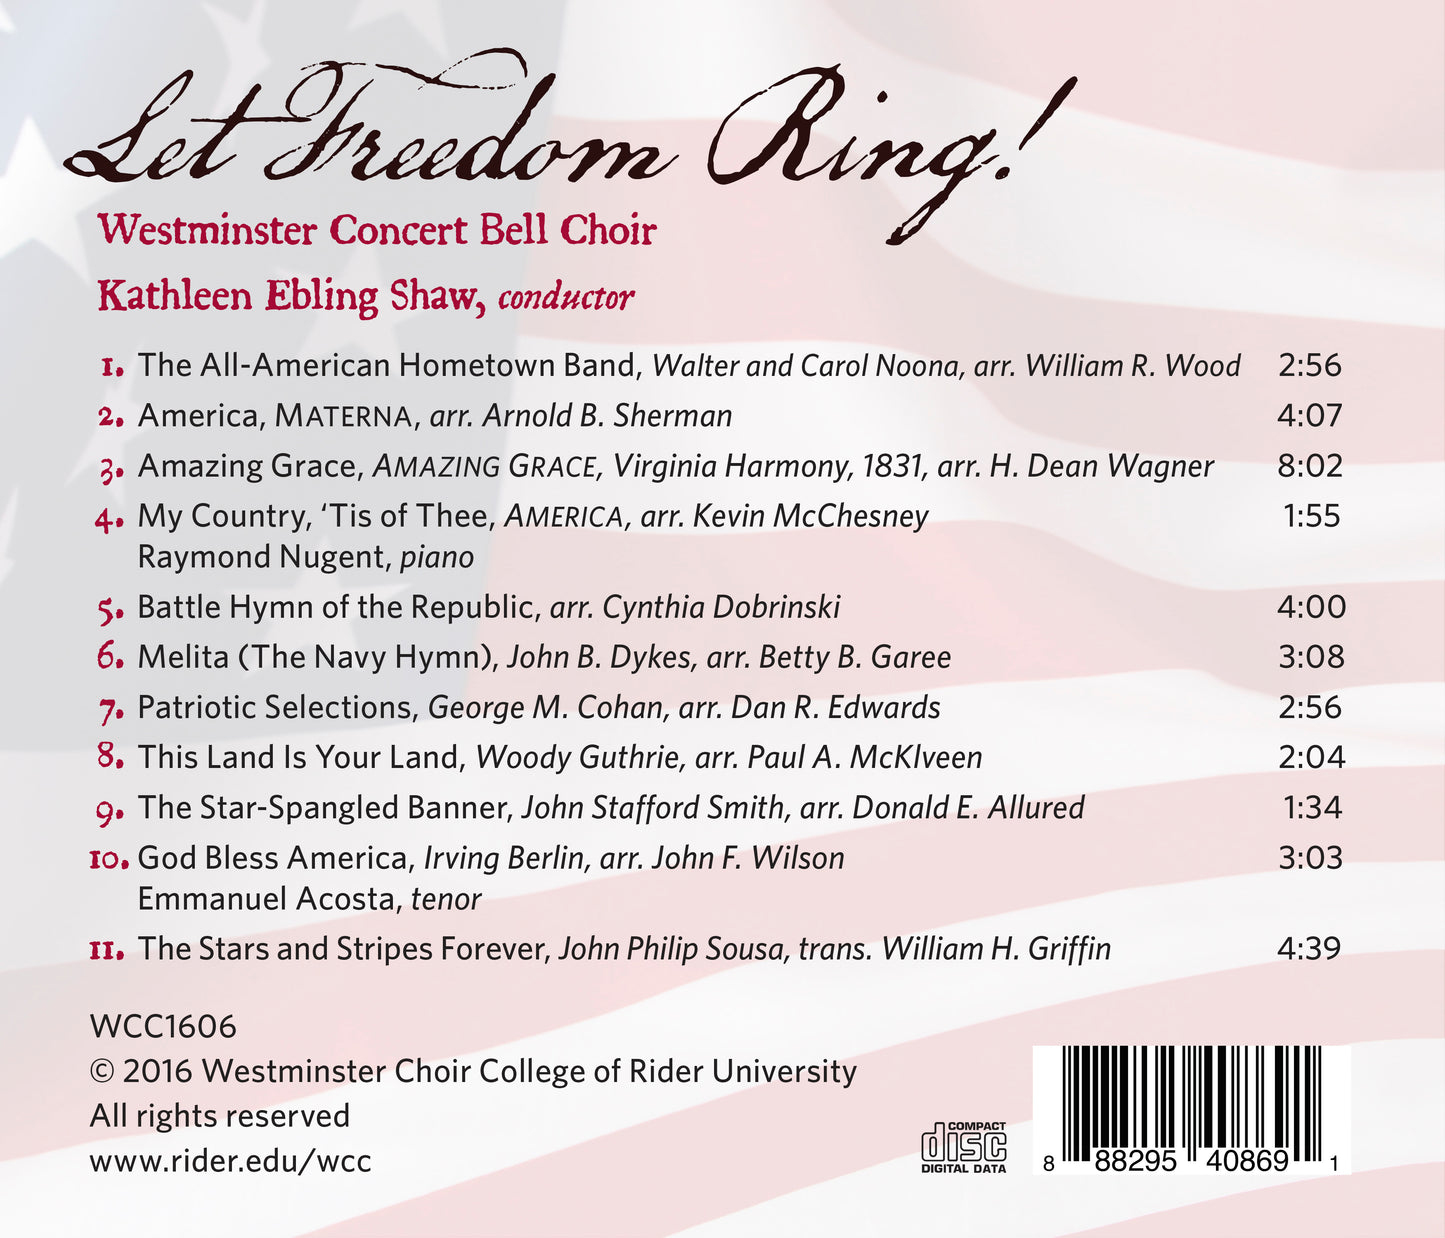 Westminster Church Bell Choir: Let Freedom Ring